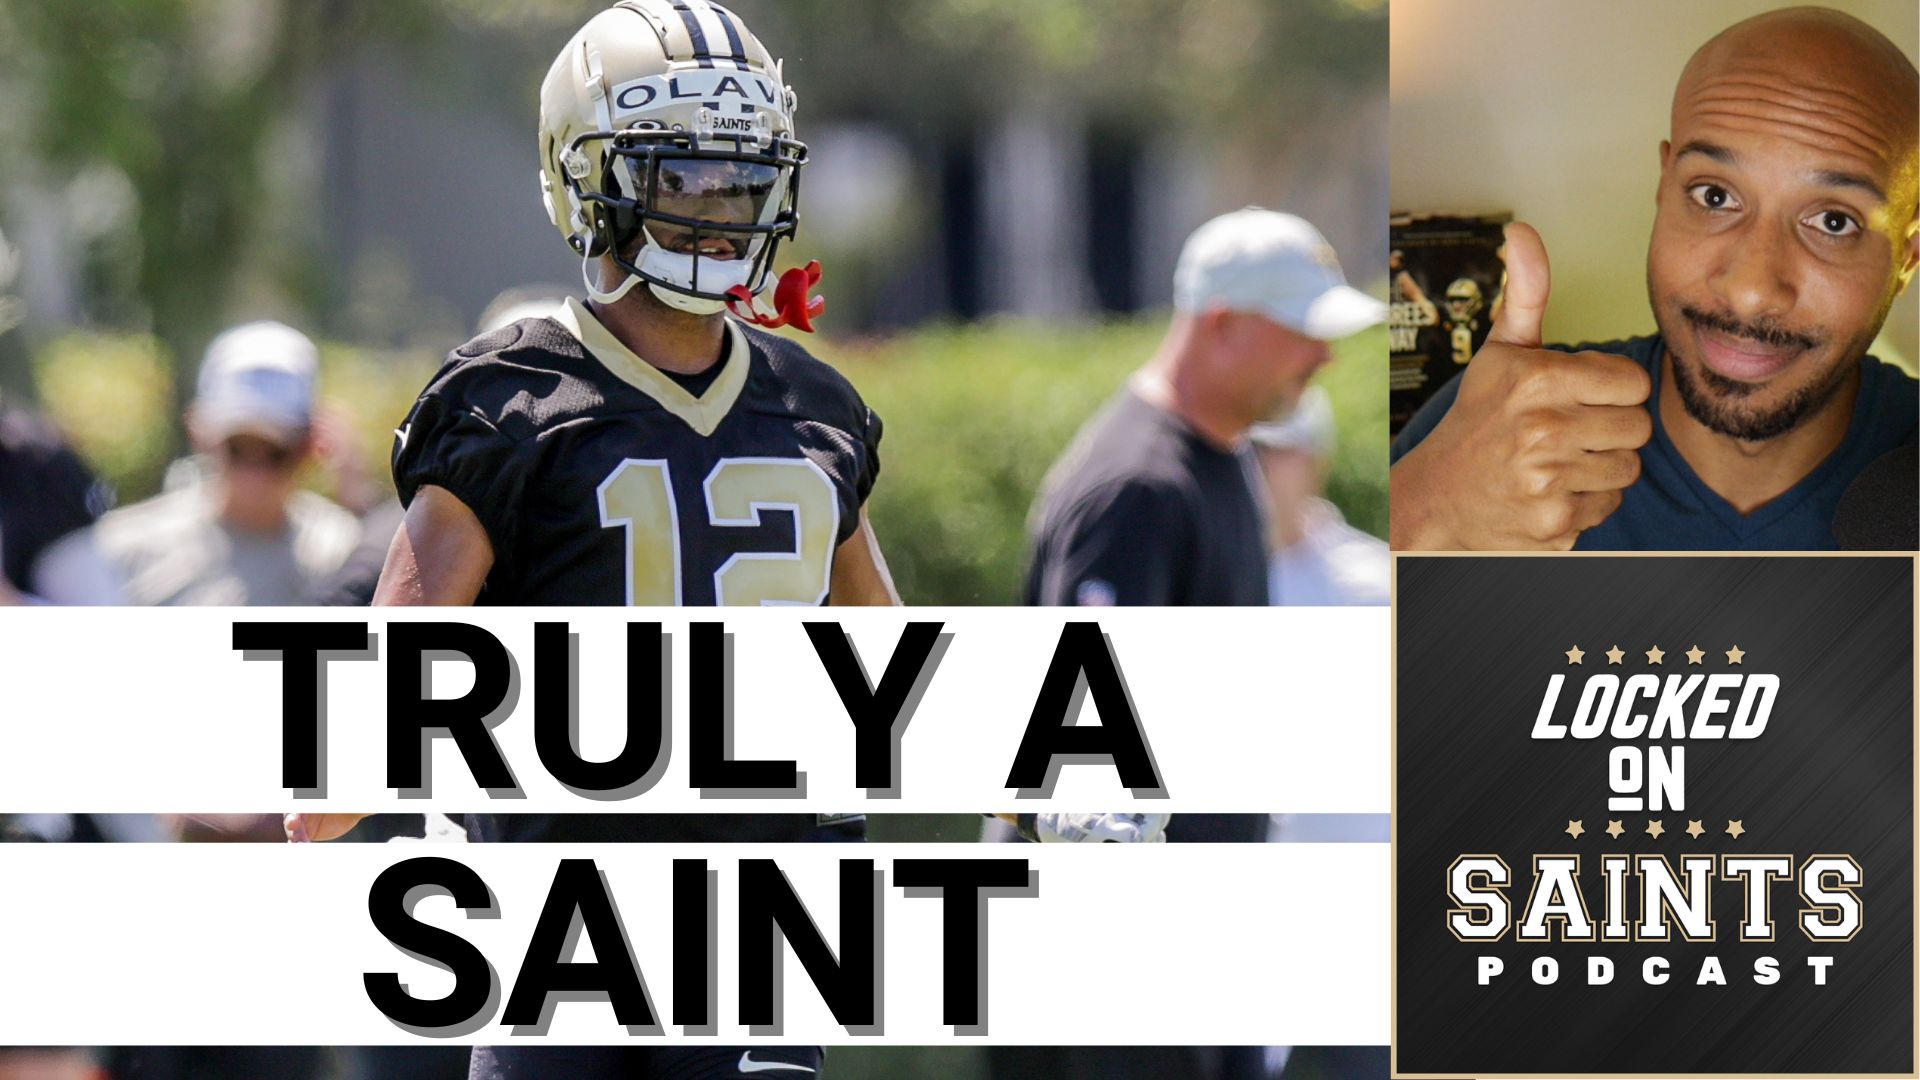 New Orleans Saints rookie Chris Olave set to make major impact on and off field